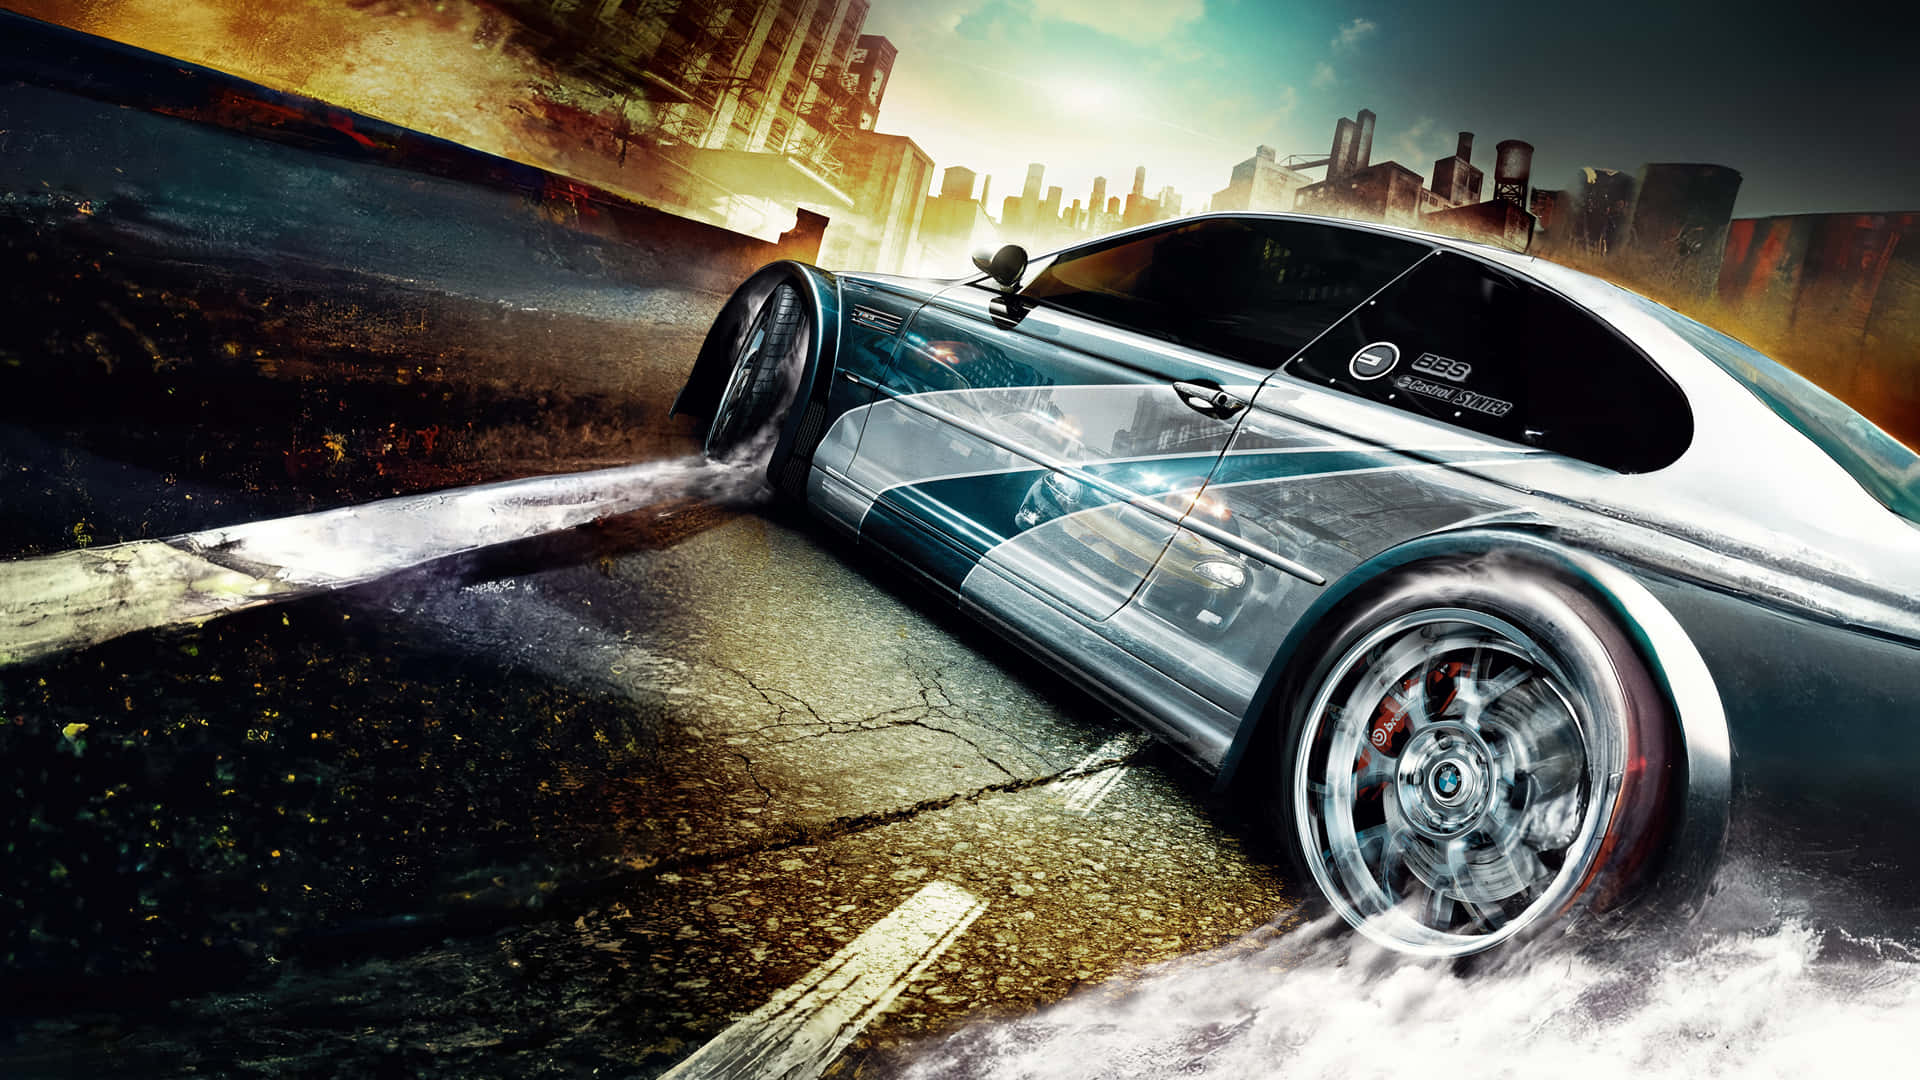 Caption: High-intensity Car Race In Need For Speed: Most Wanted Wallpaper